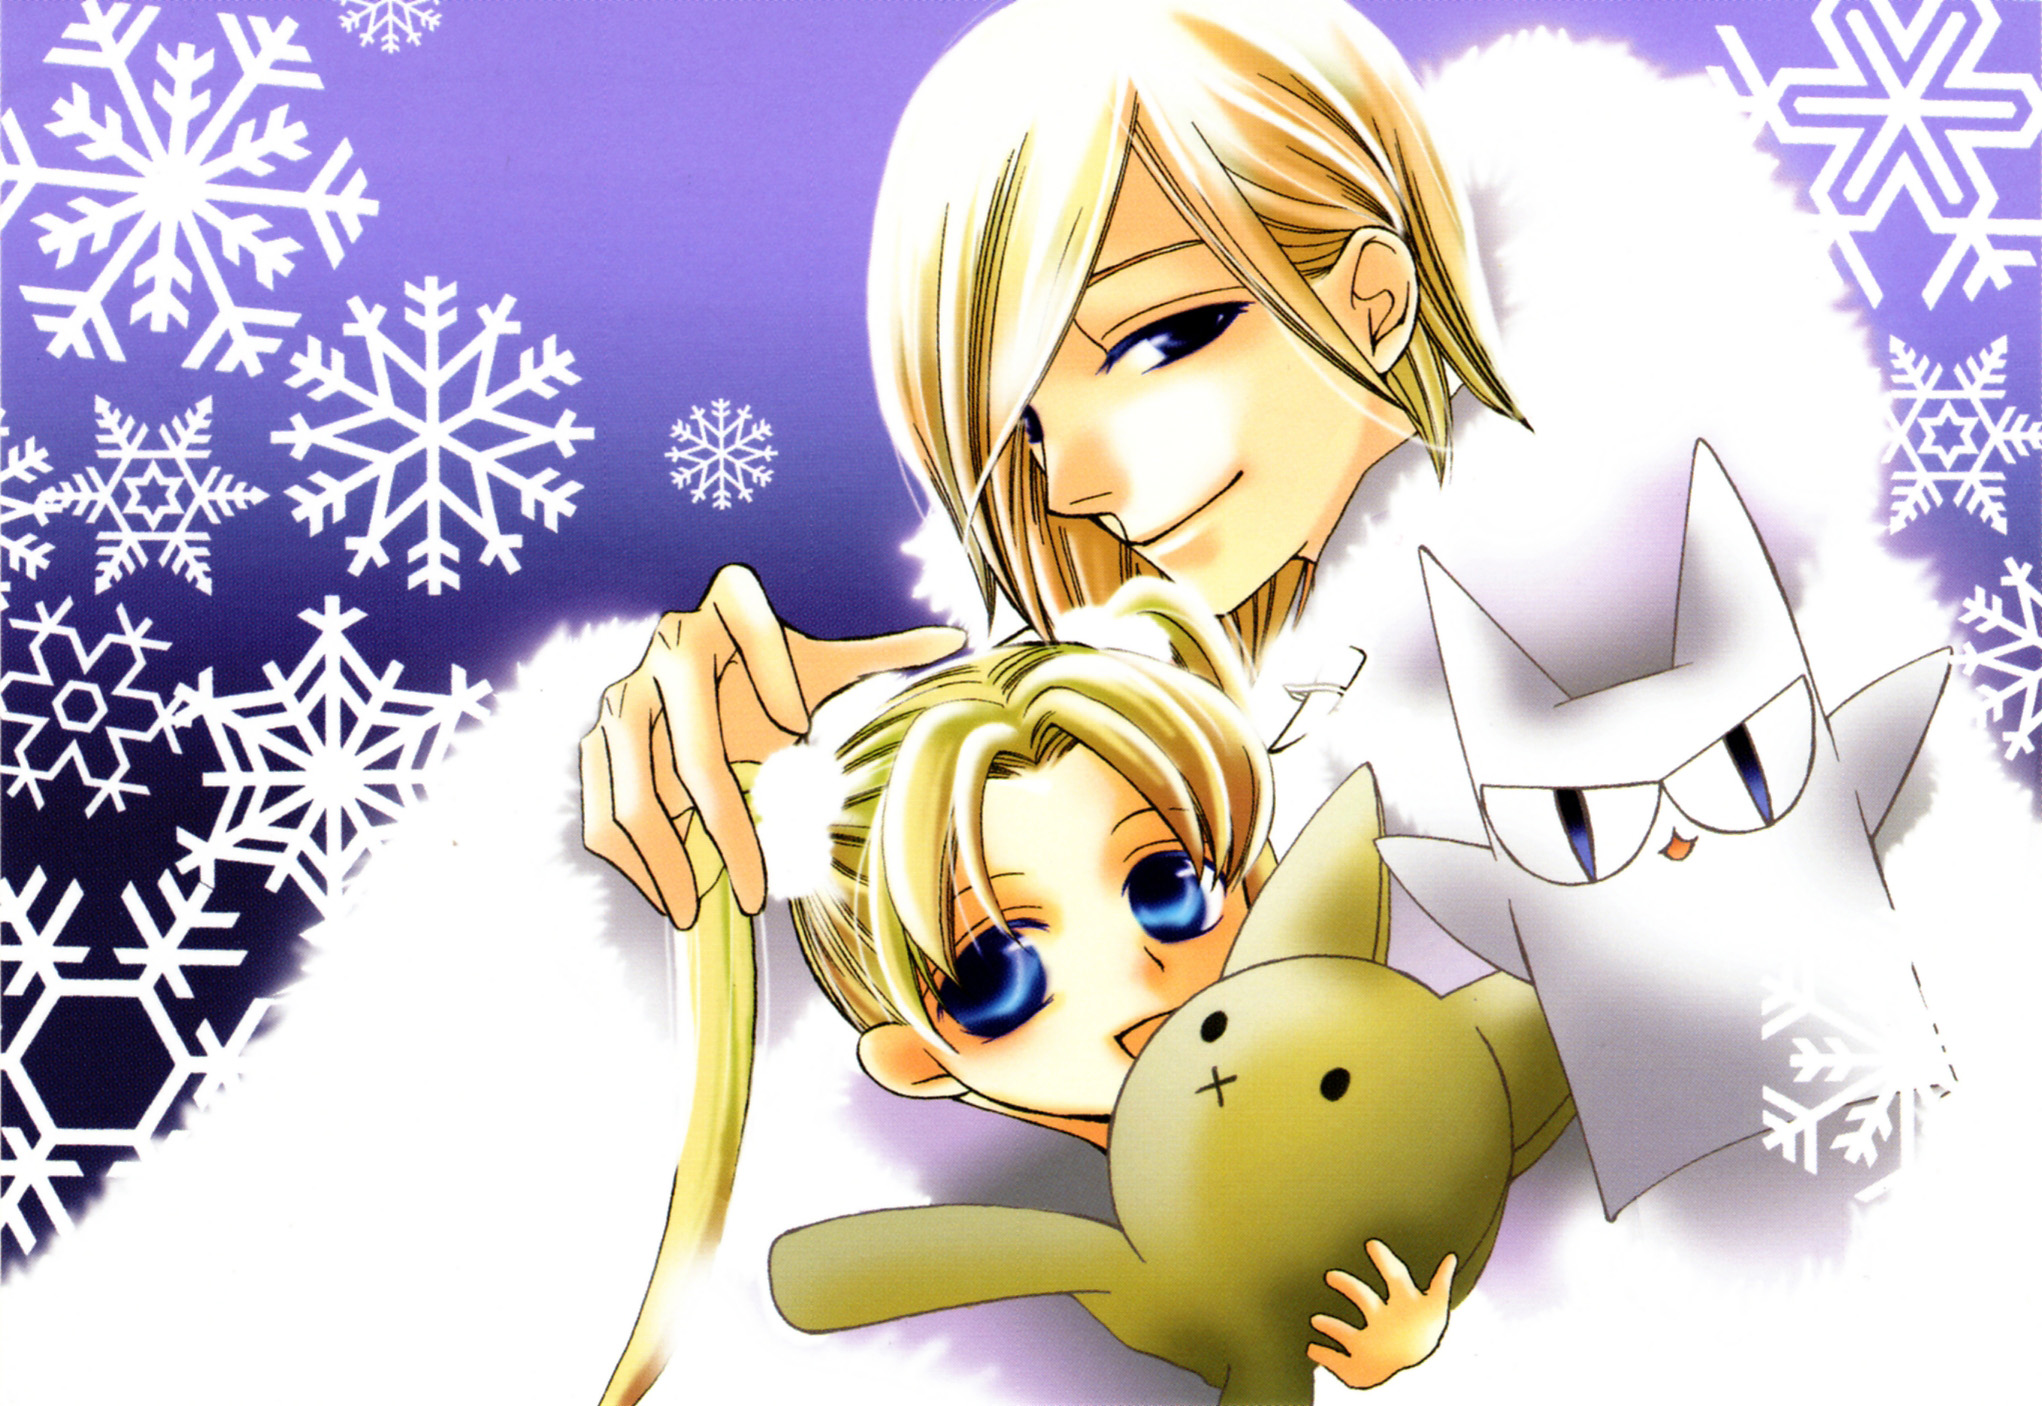 HD Ouran High School Host Club themed desktop wallpaper featuring two characters with plush cat toys on a snowflake-patterned background.